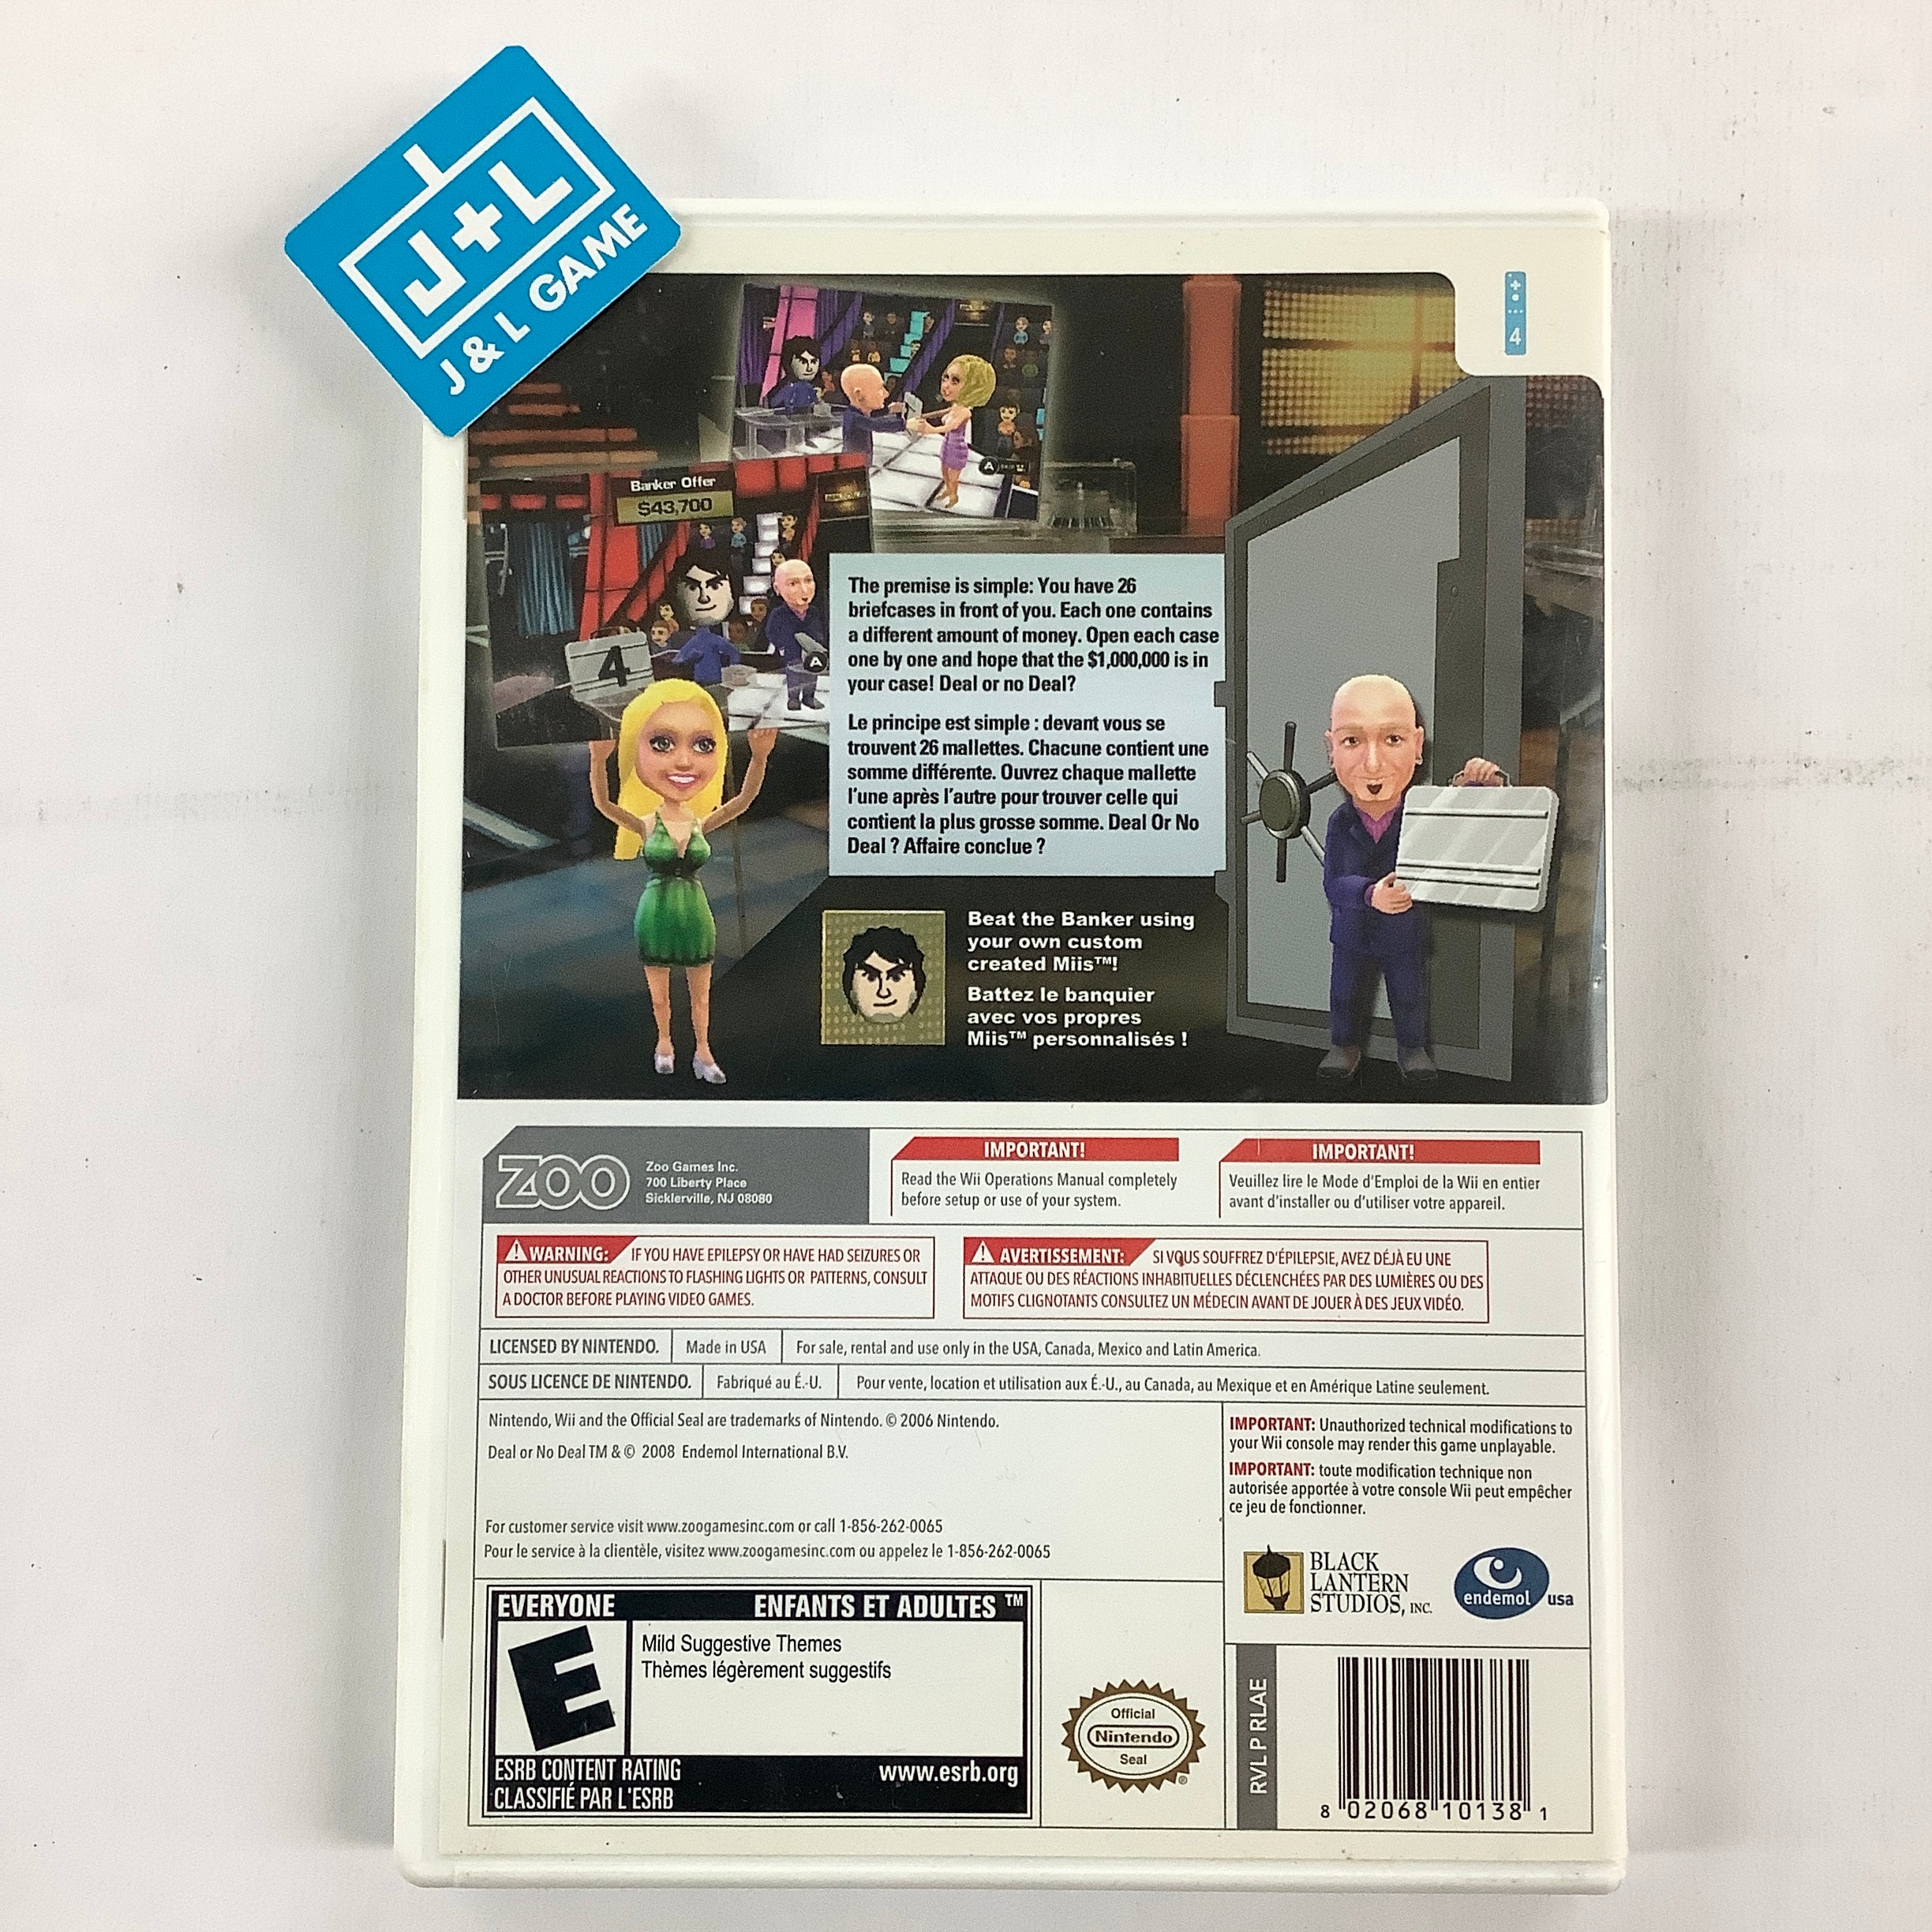 Deal or No Deal - Nintendo Wii [Pre-Owned] Video Games Destination Software   